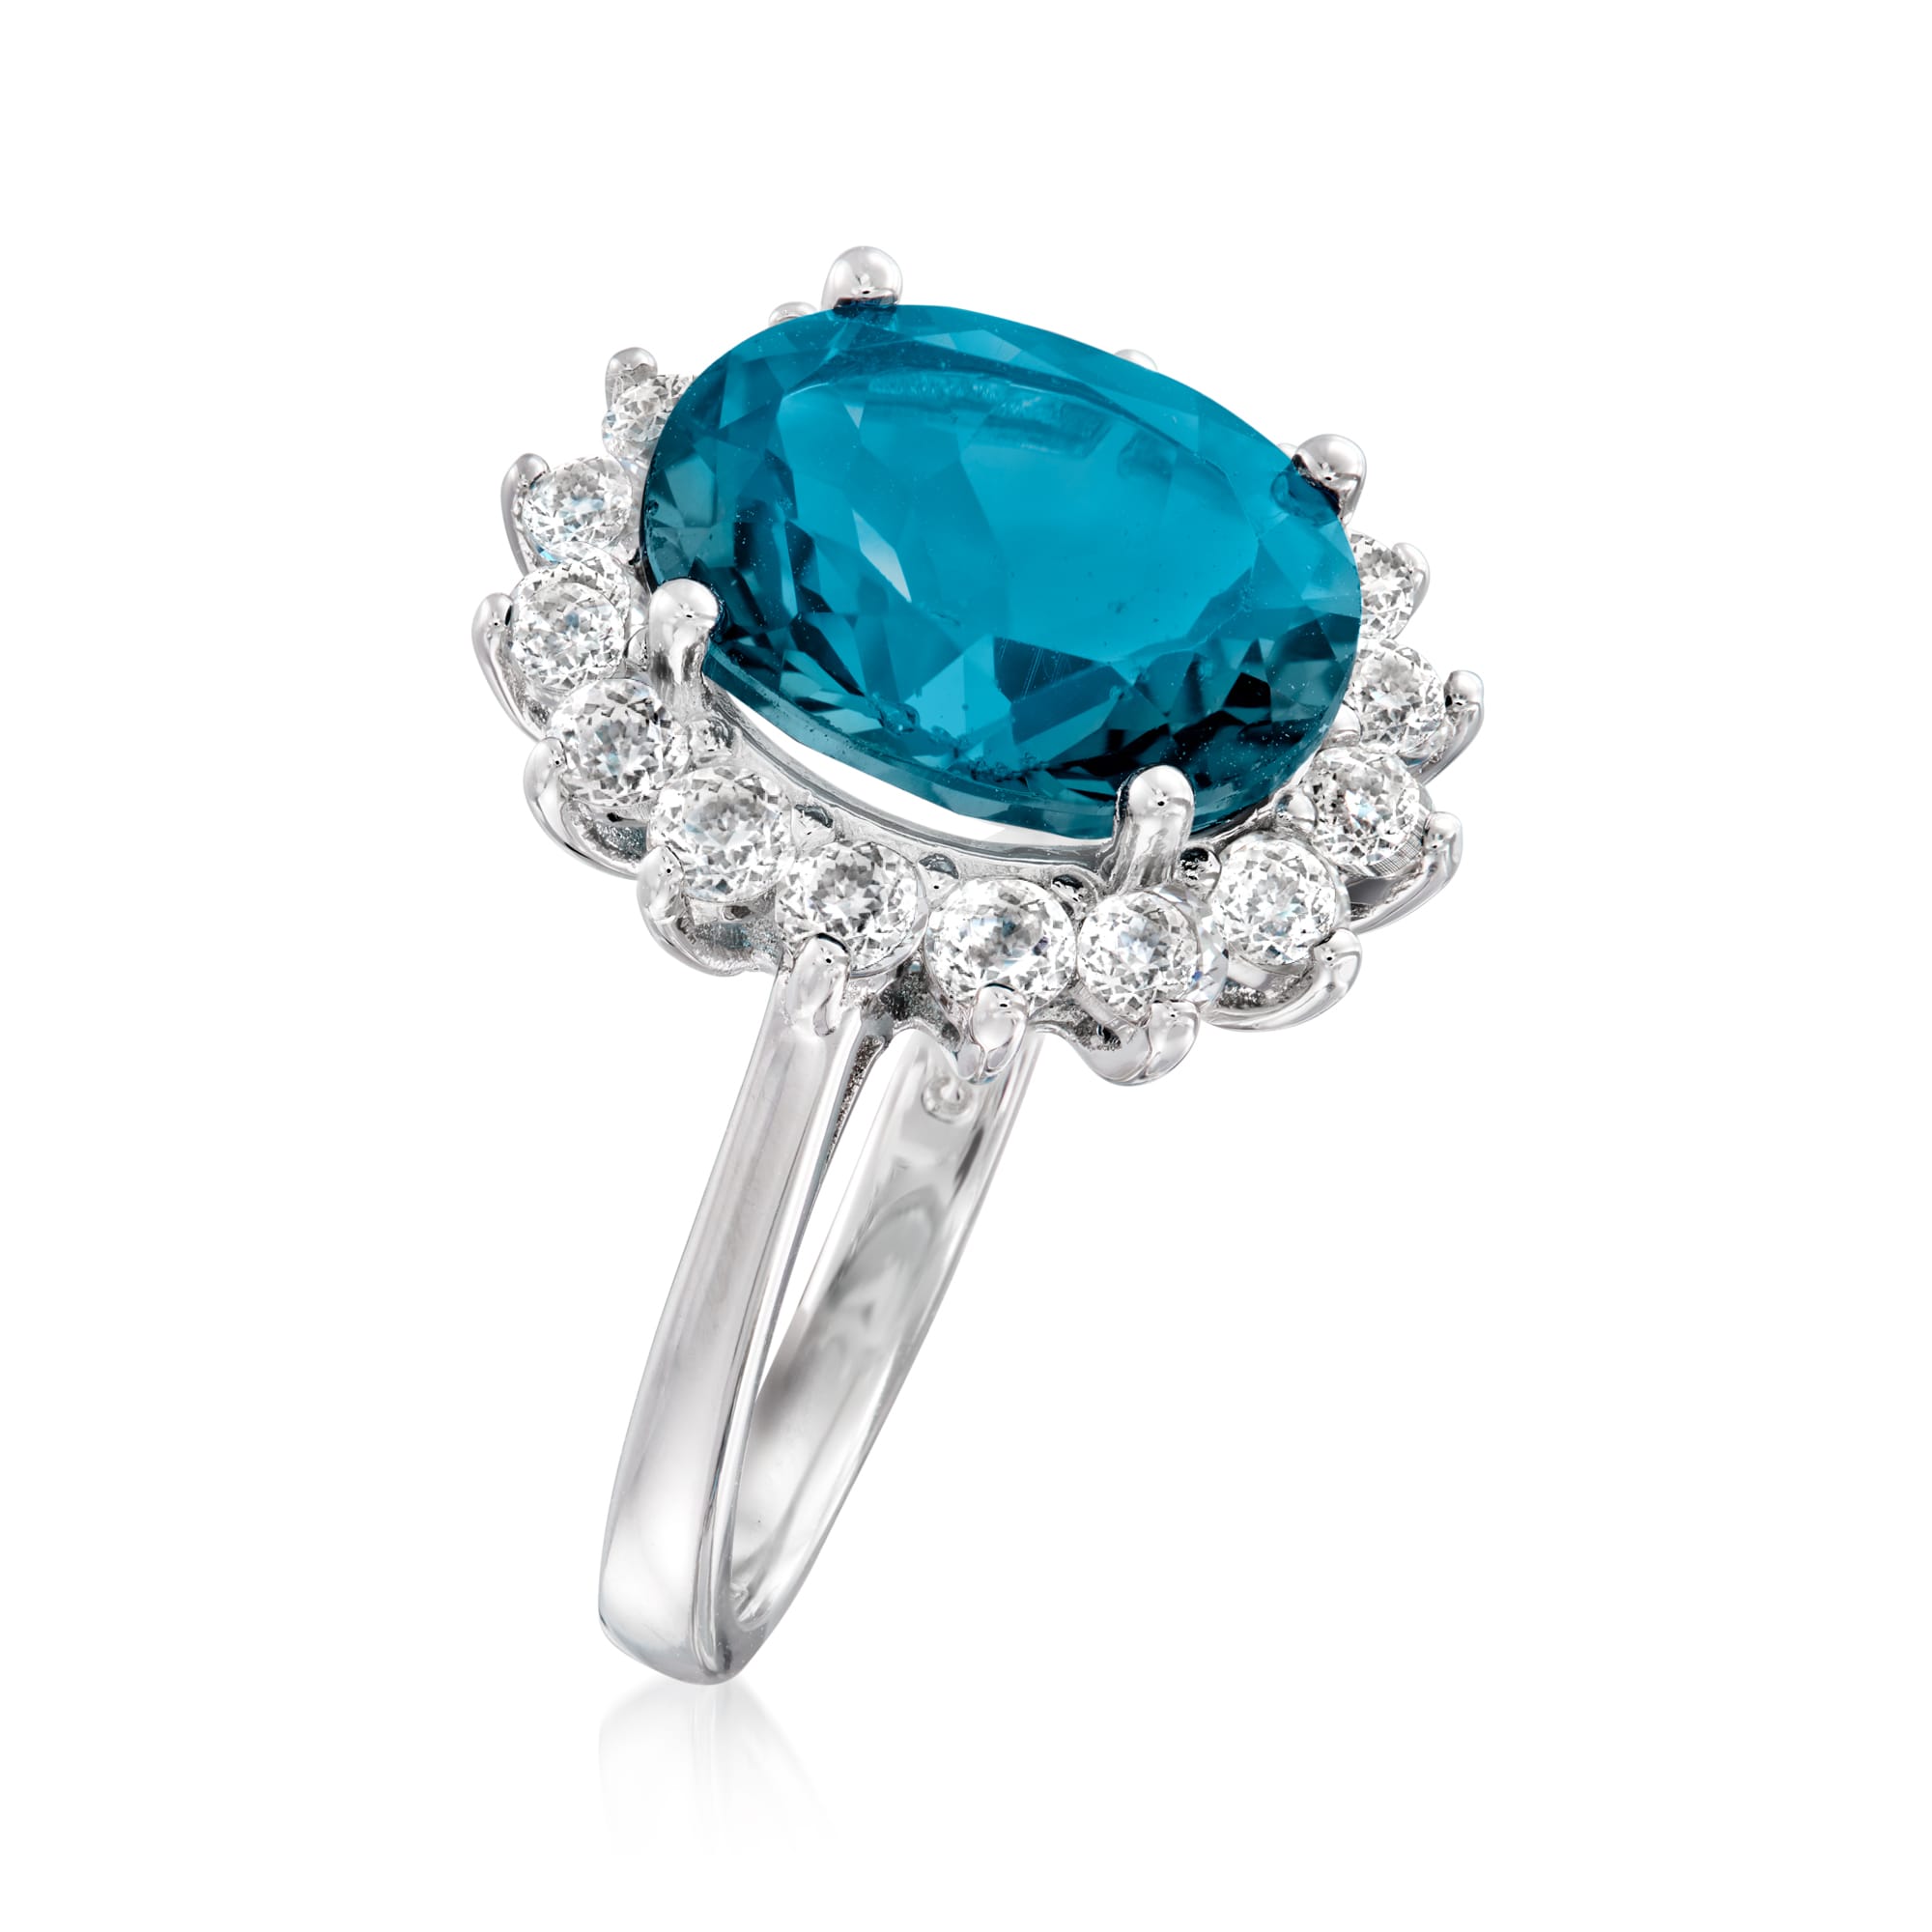 5.40 Carat London Blue Topaz and 1.10 ct. t.w. White Topaz Ring in ...